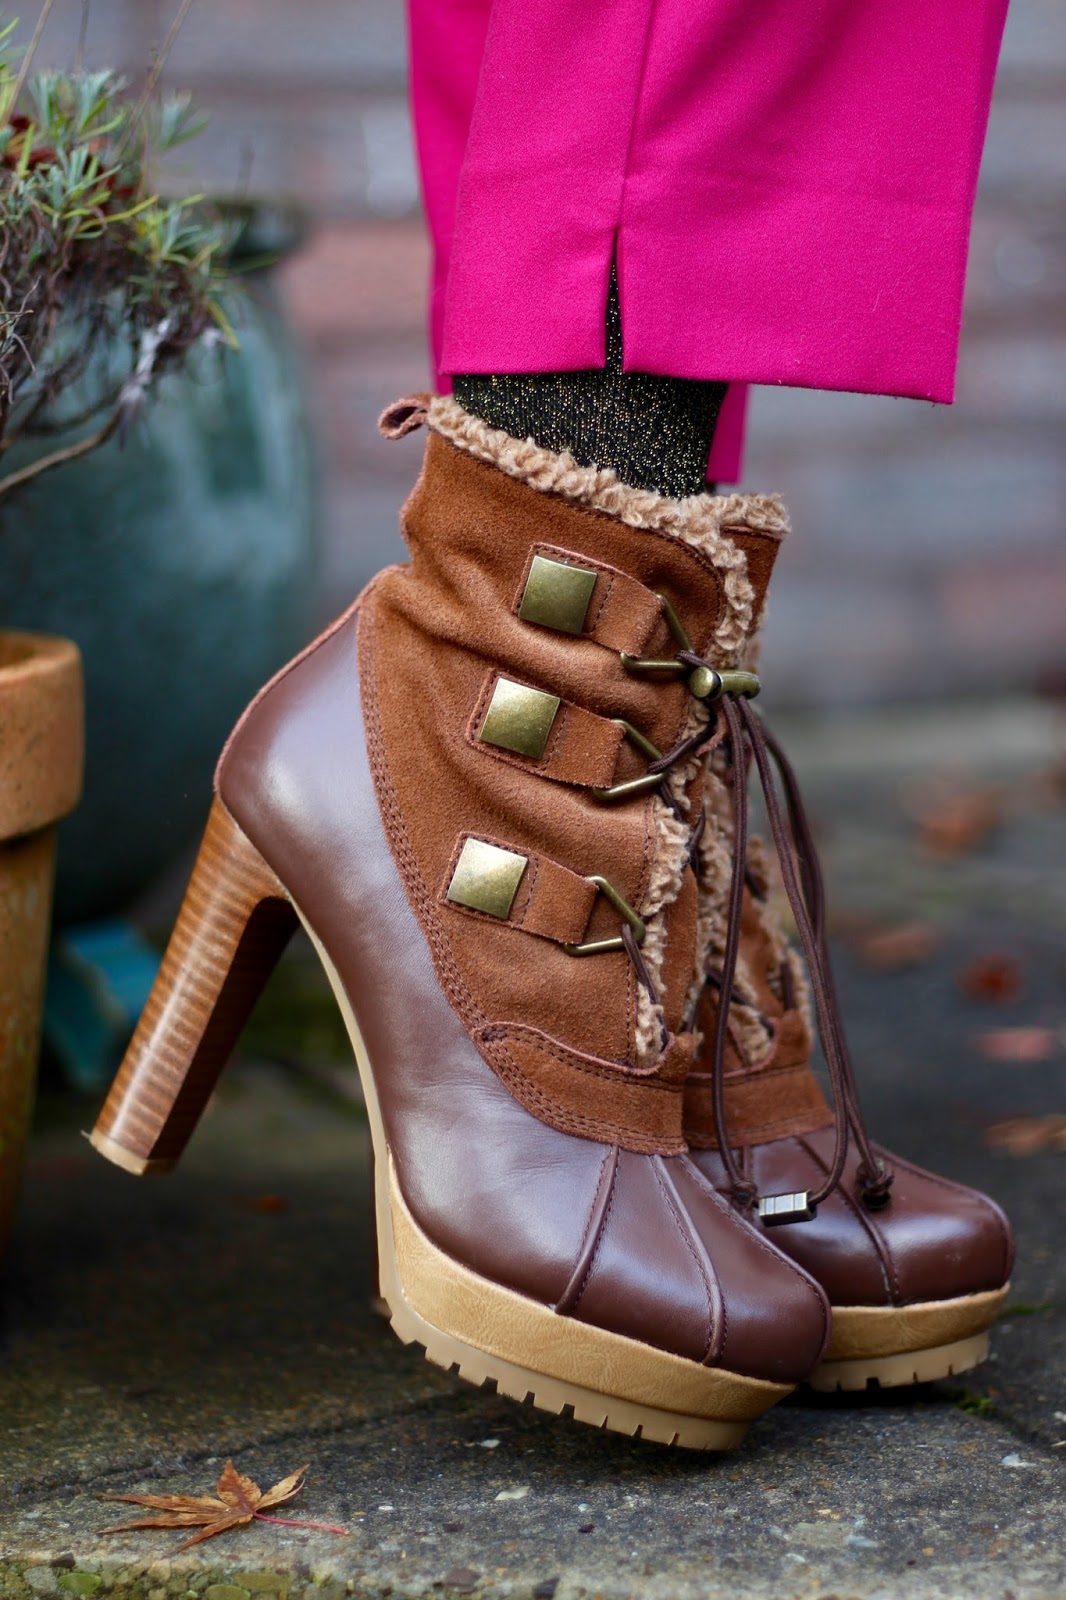 Bright Pink Peg Leg Trousers & Toffee Coloured Hiking Boots | Fake Fabulous